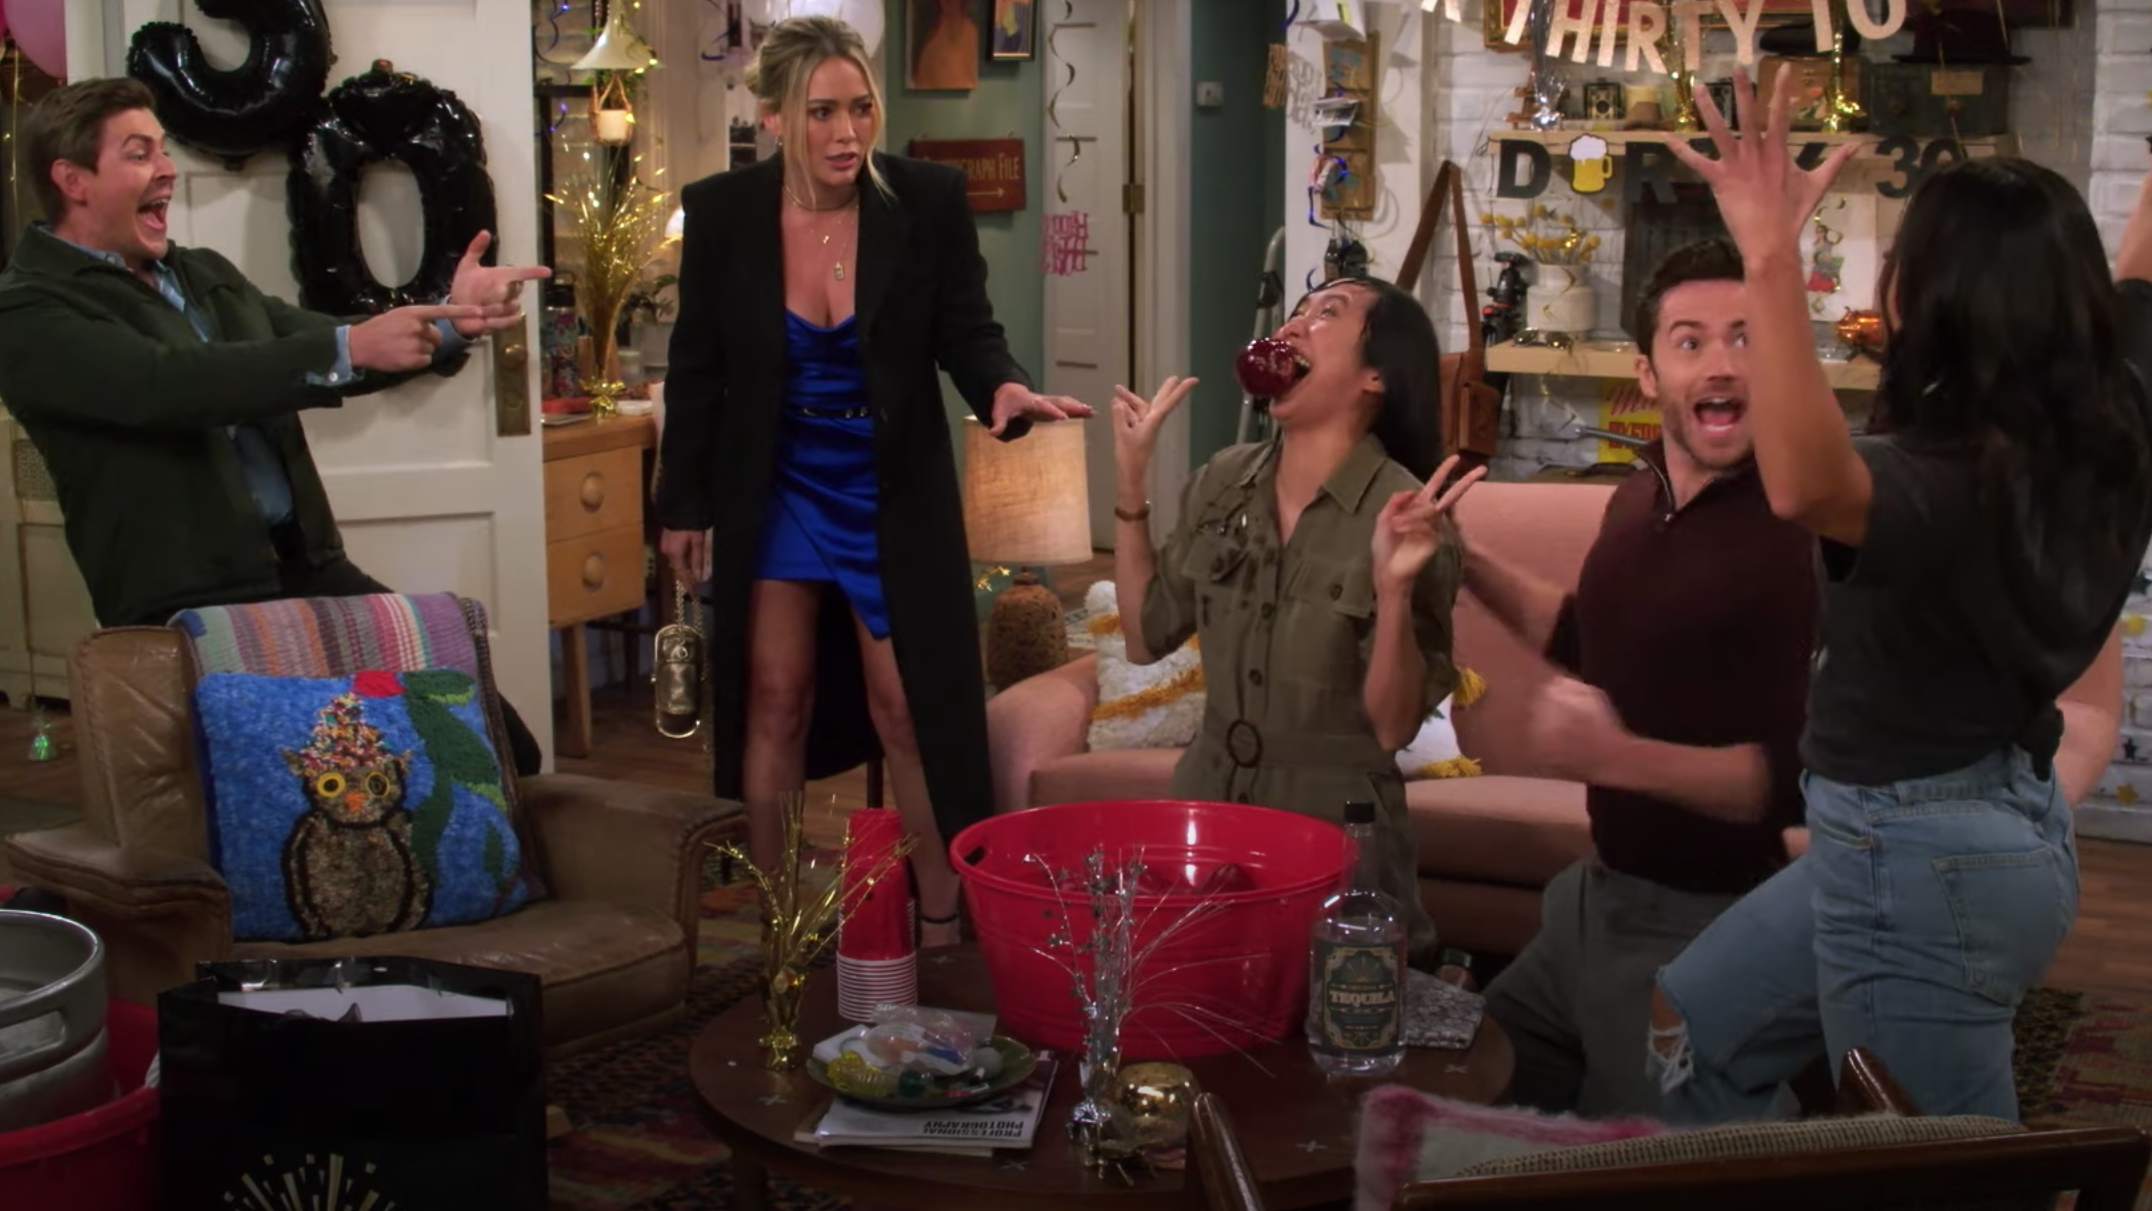 Hilary Duff is tired of Tinder dates in the first How I Met Your Father trailer